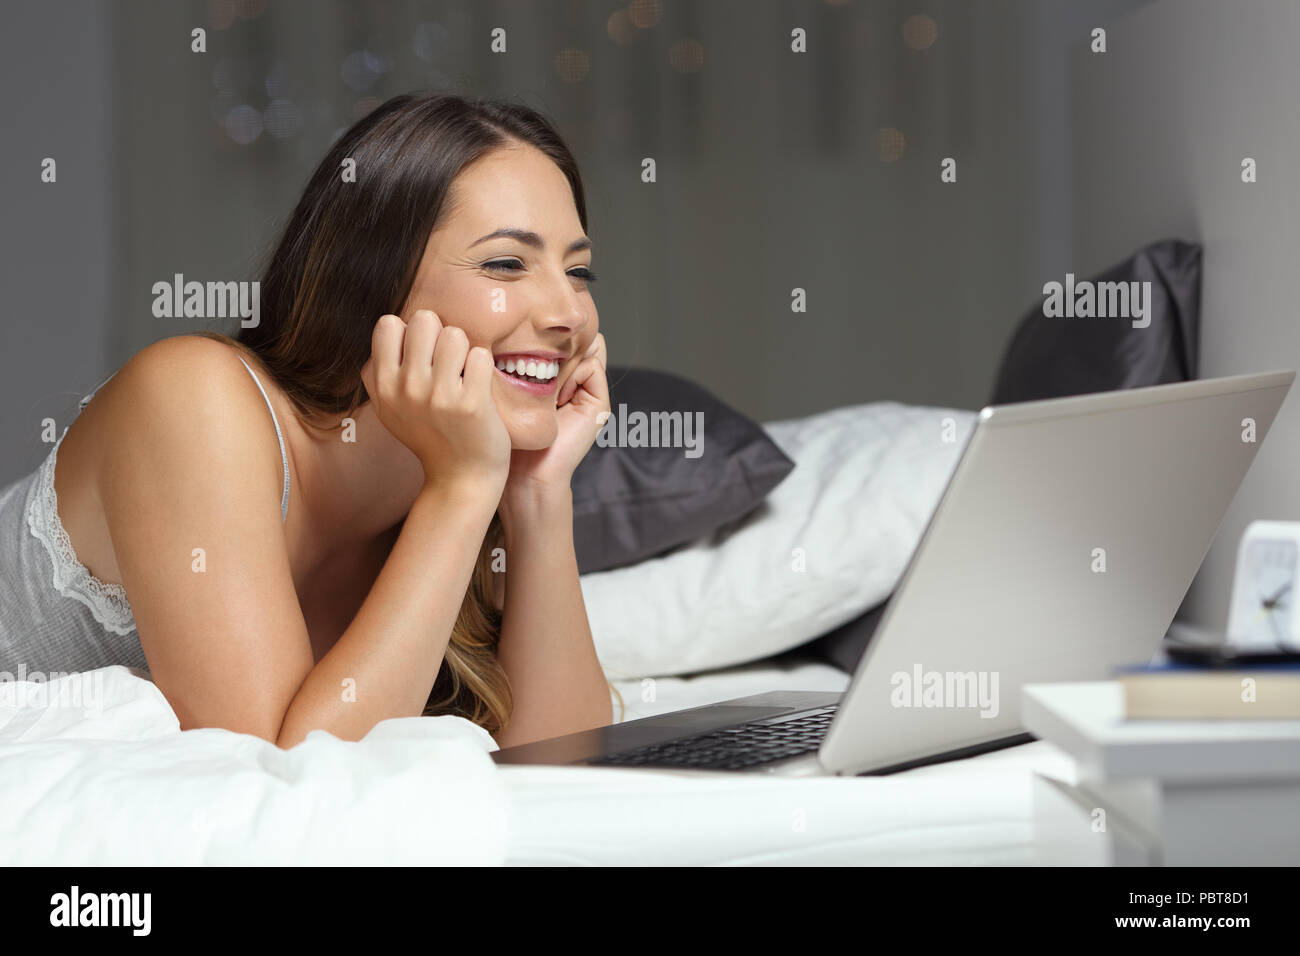 Candid woman using a laptop on a bed in the night at home Stock Photo